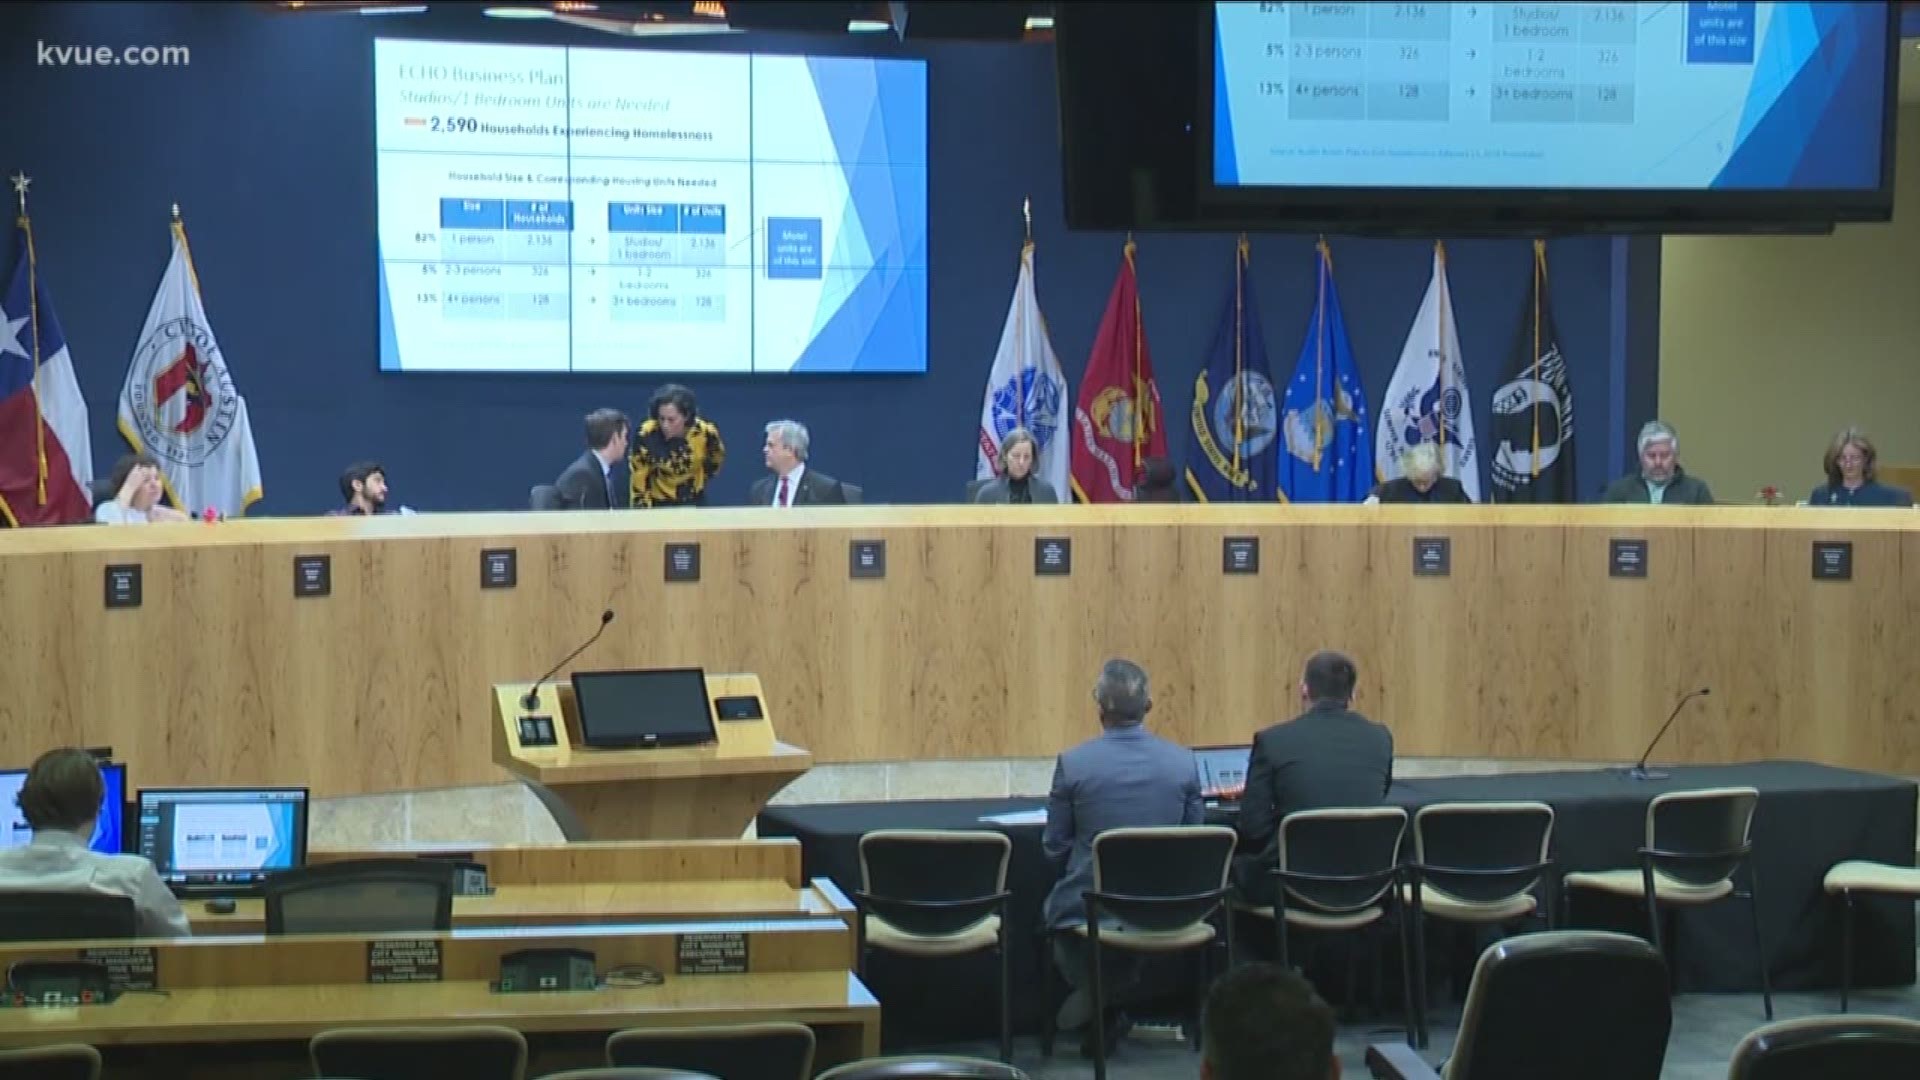 A heated debate among City leaders continues on how to make Austin more affordable.